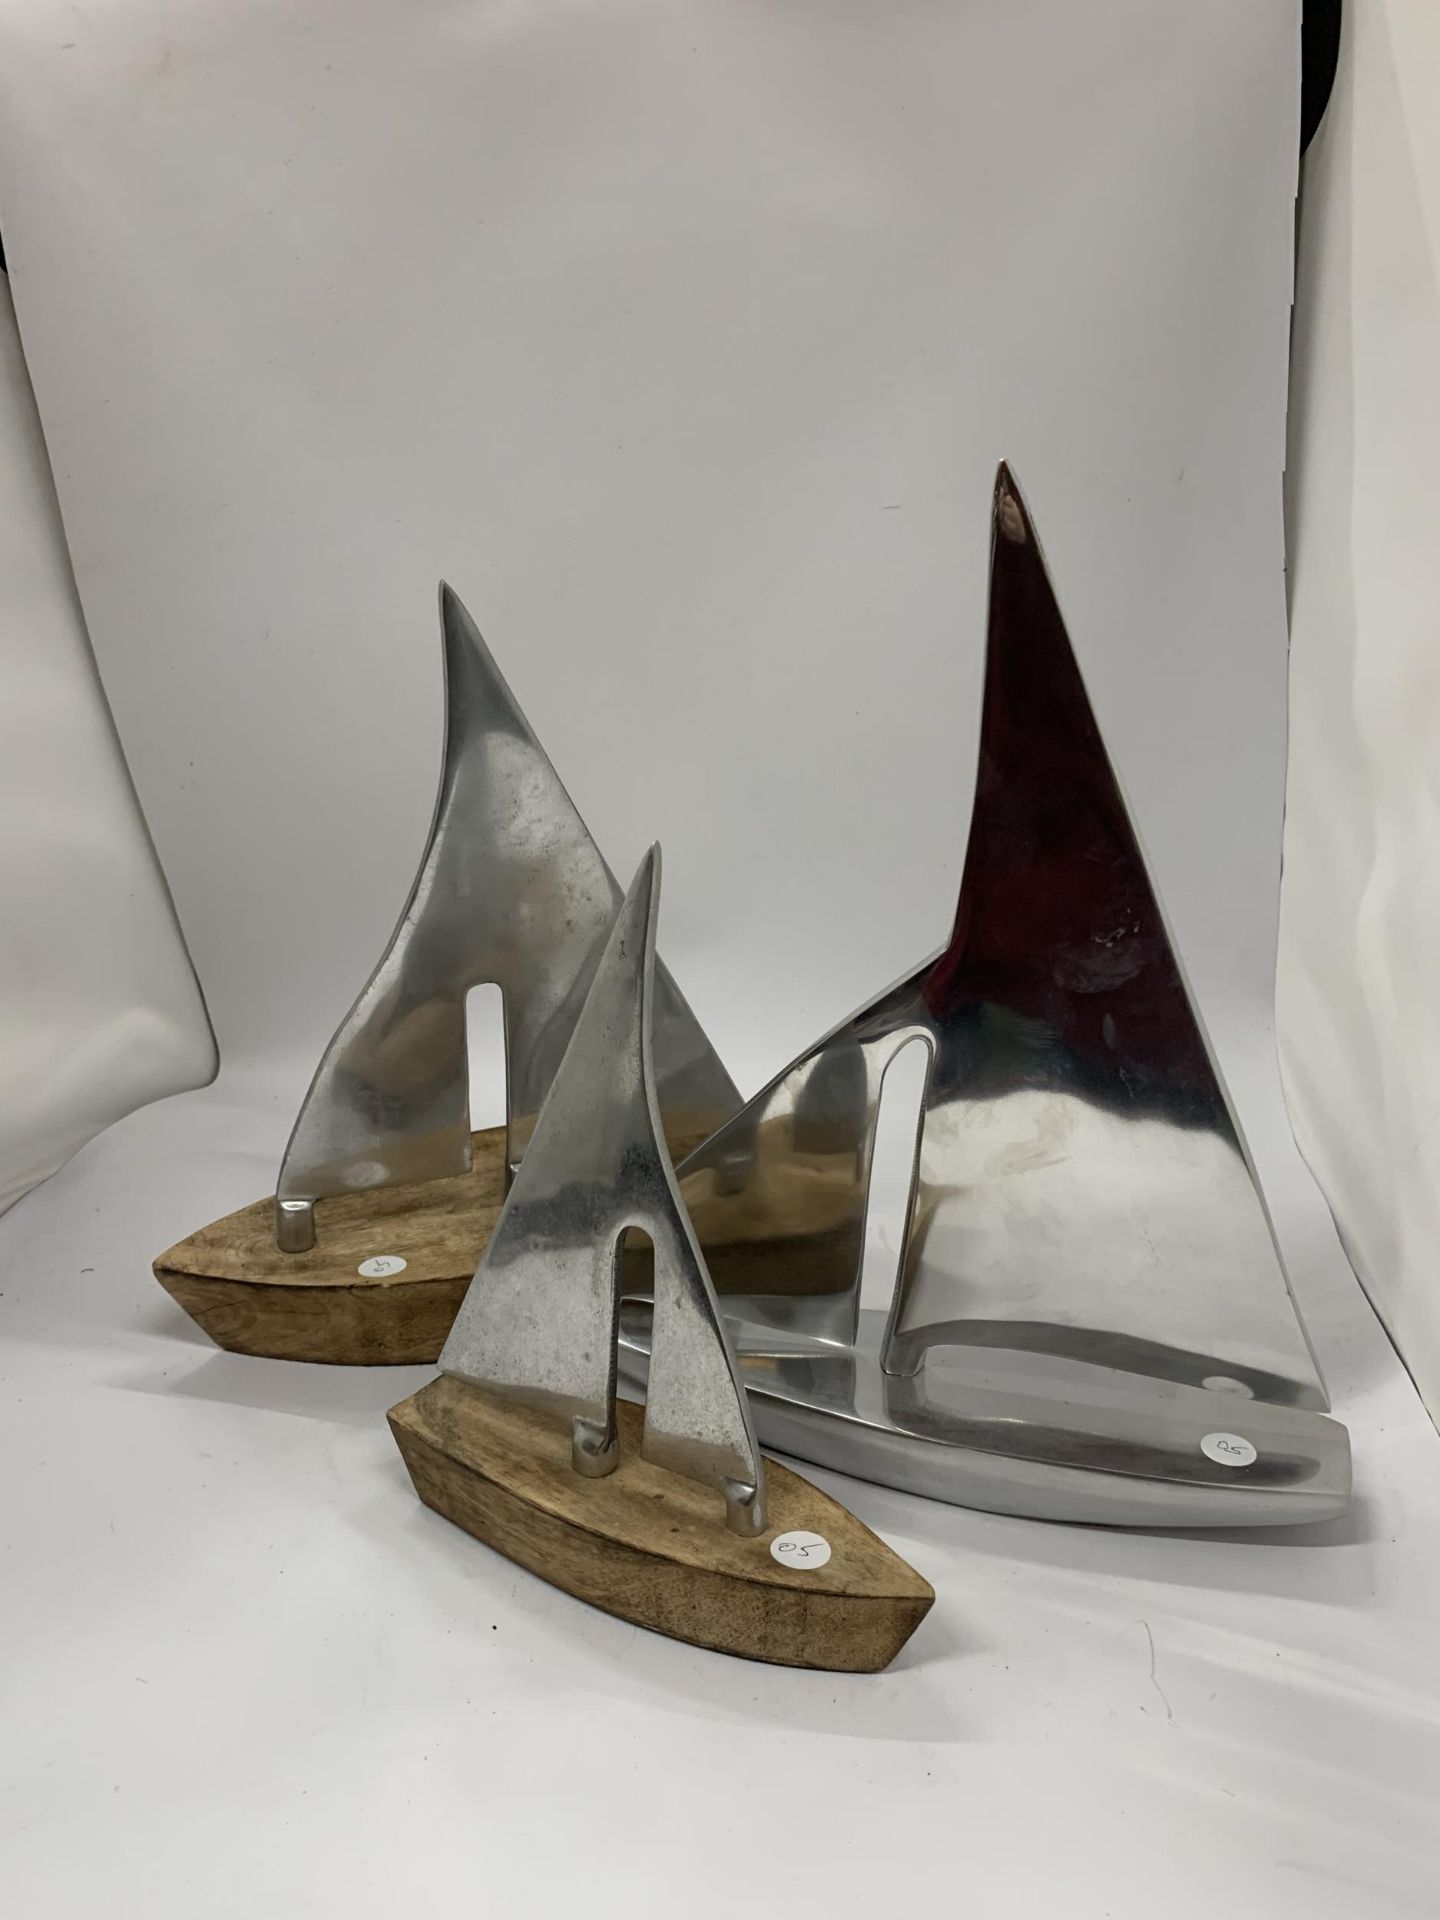 A COLLECTION OF THREE DANISH CHROME SHIP MODELS